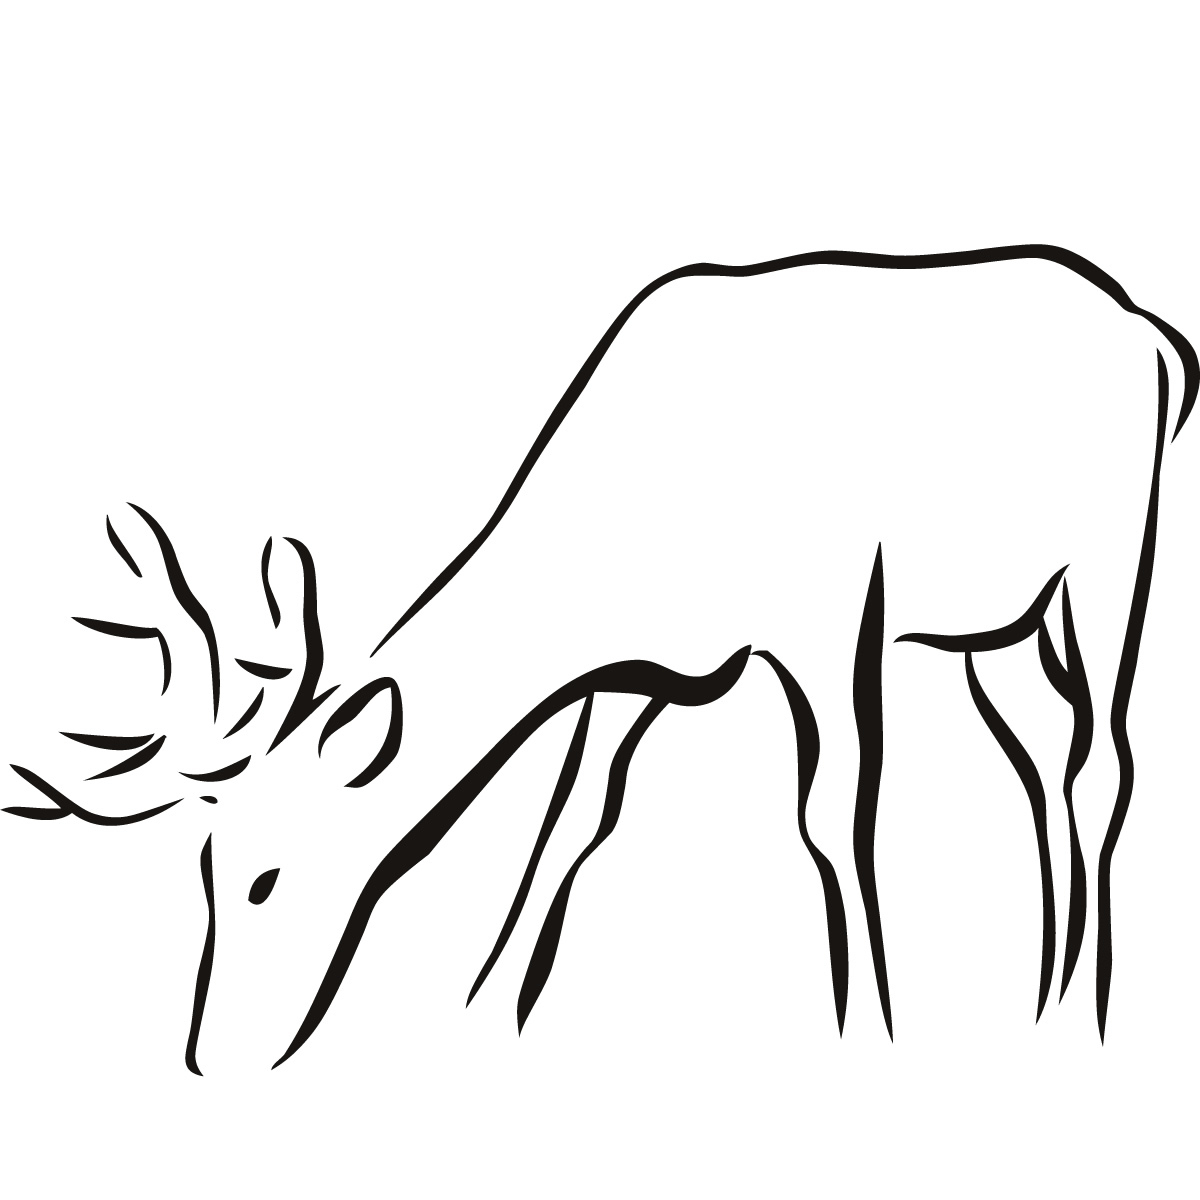 Free Animal Outlines, Download Free Clip Art, Free Clip Art On - Free Printable Arty Animal Outlines